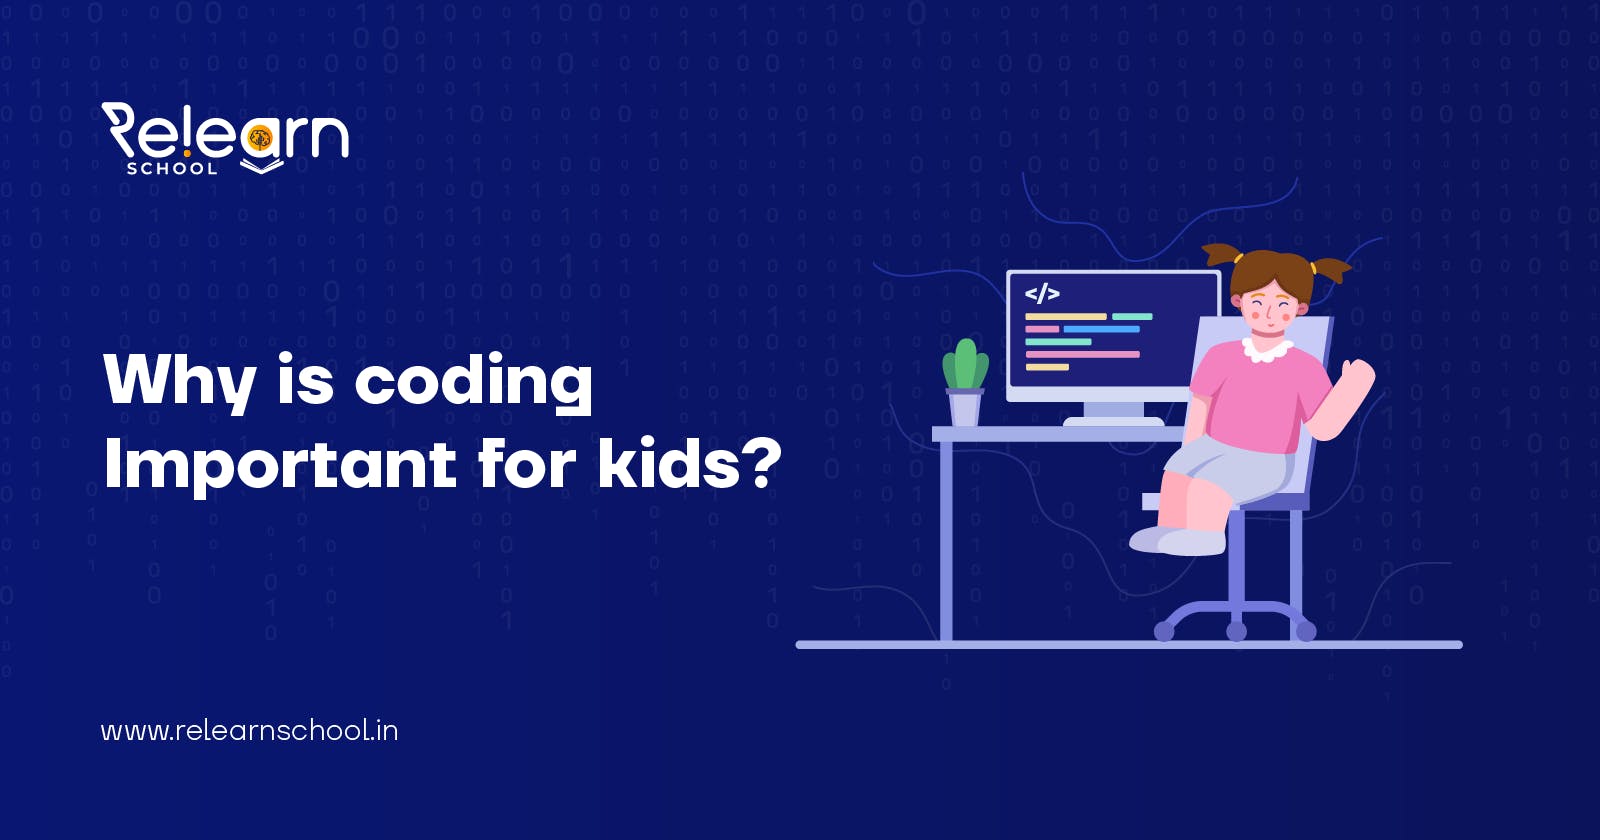 Why is coding important for kids?